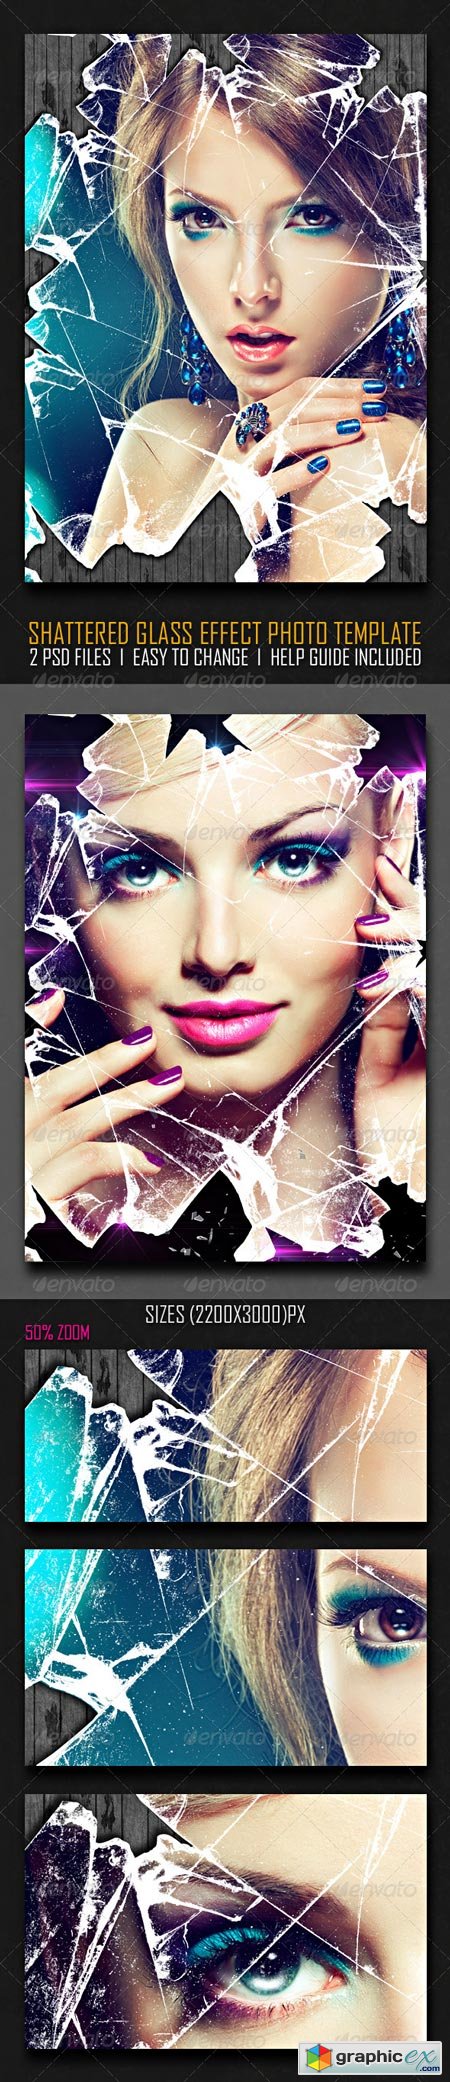 Shattered Glass Effect Photo Template 6521455